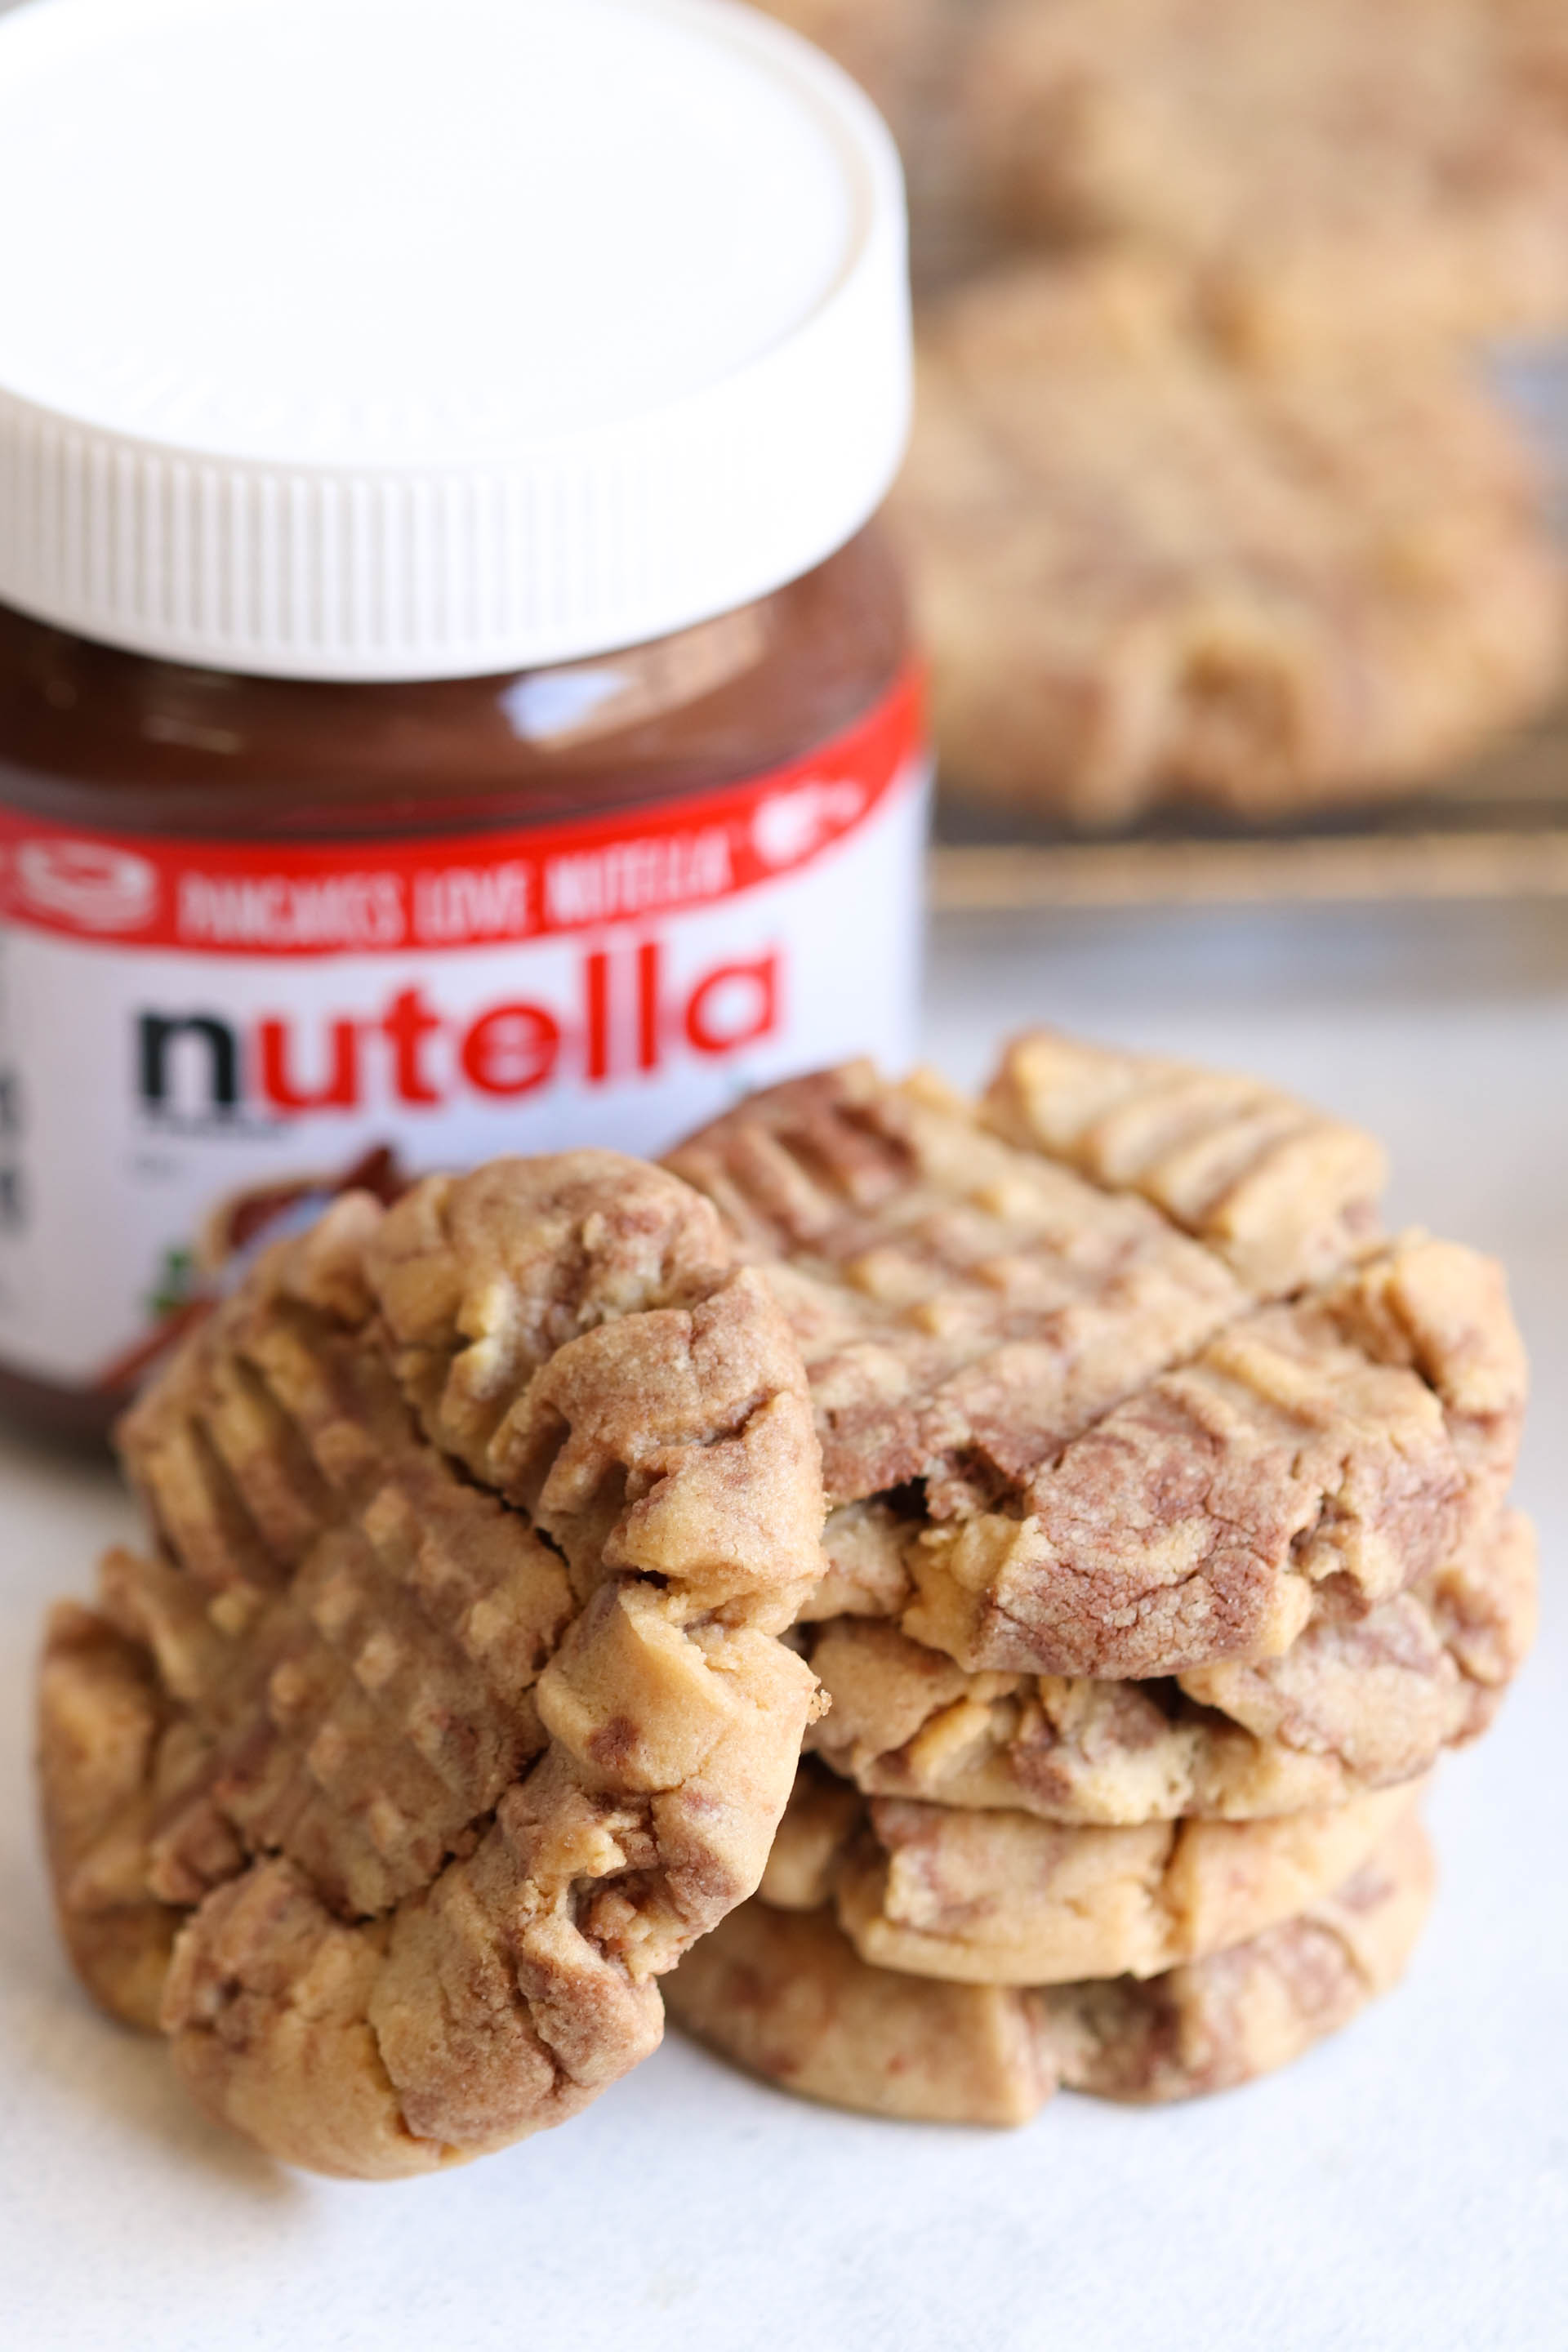 Peanut Butter Nutella Swirl Cookies stacked